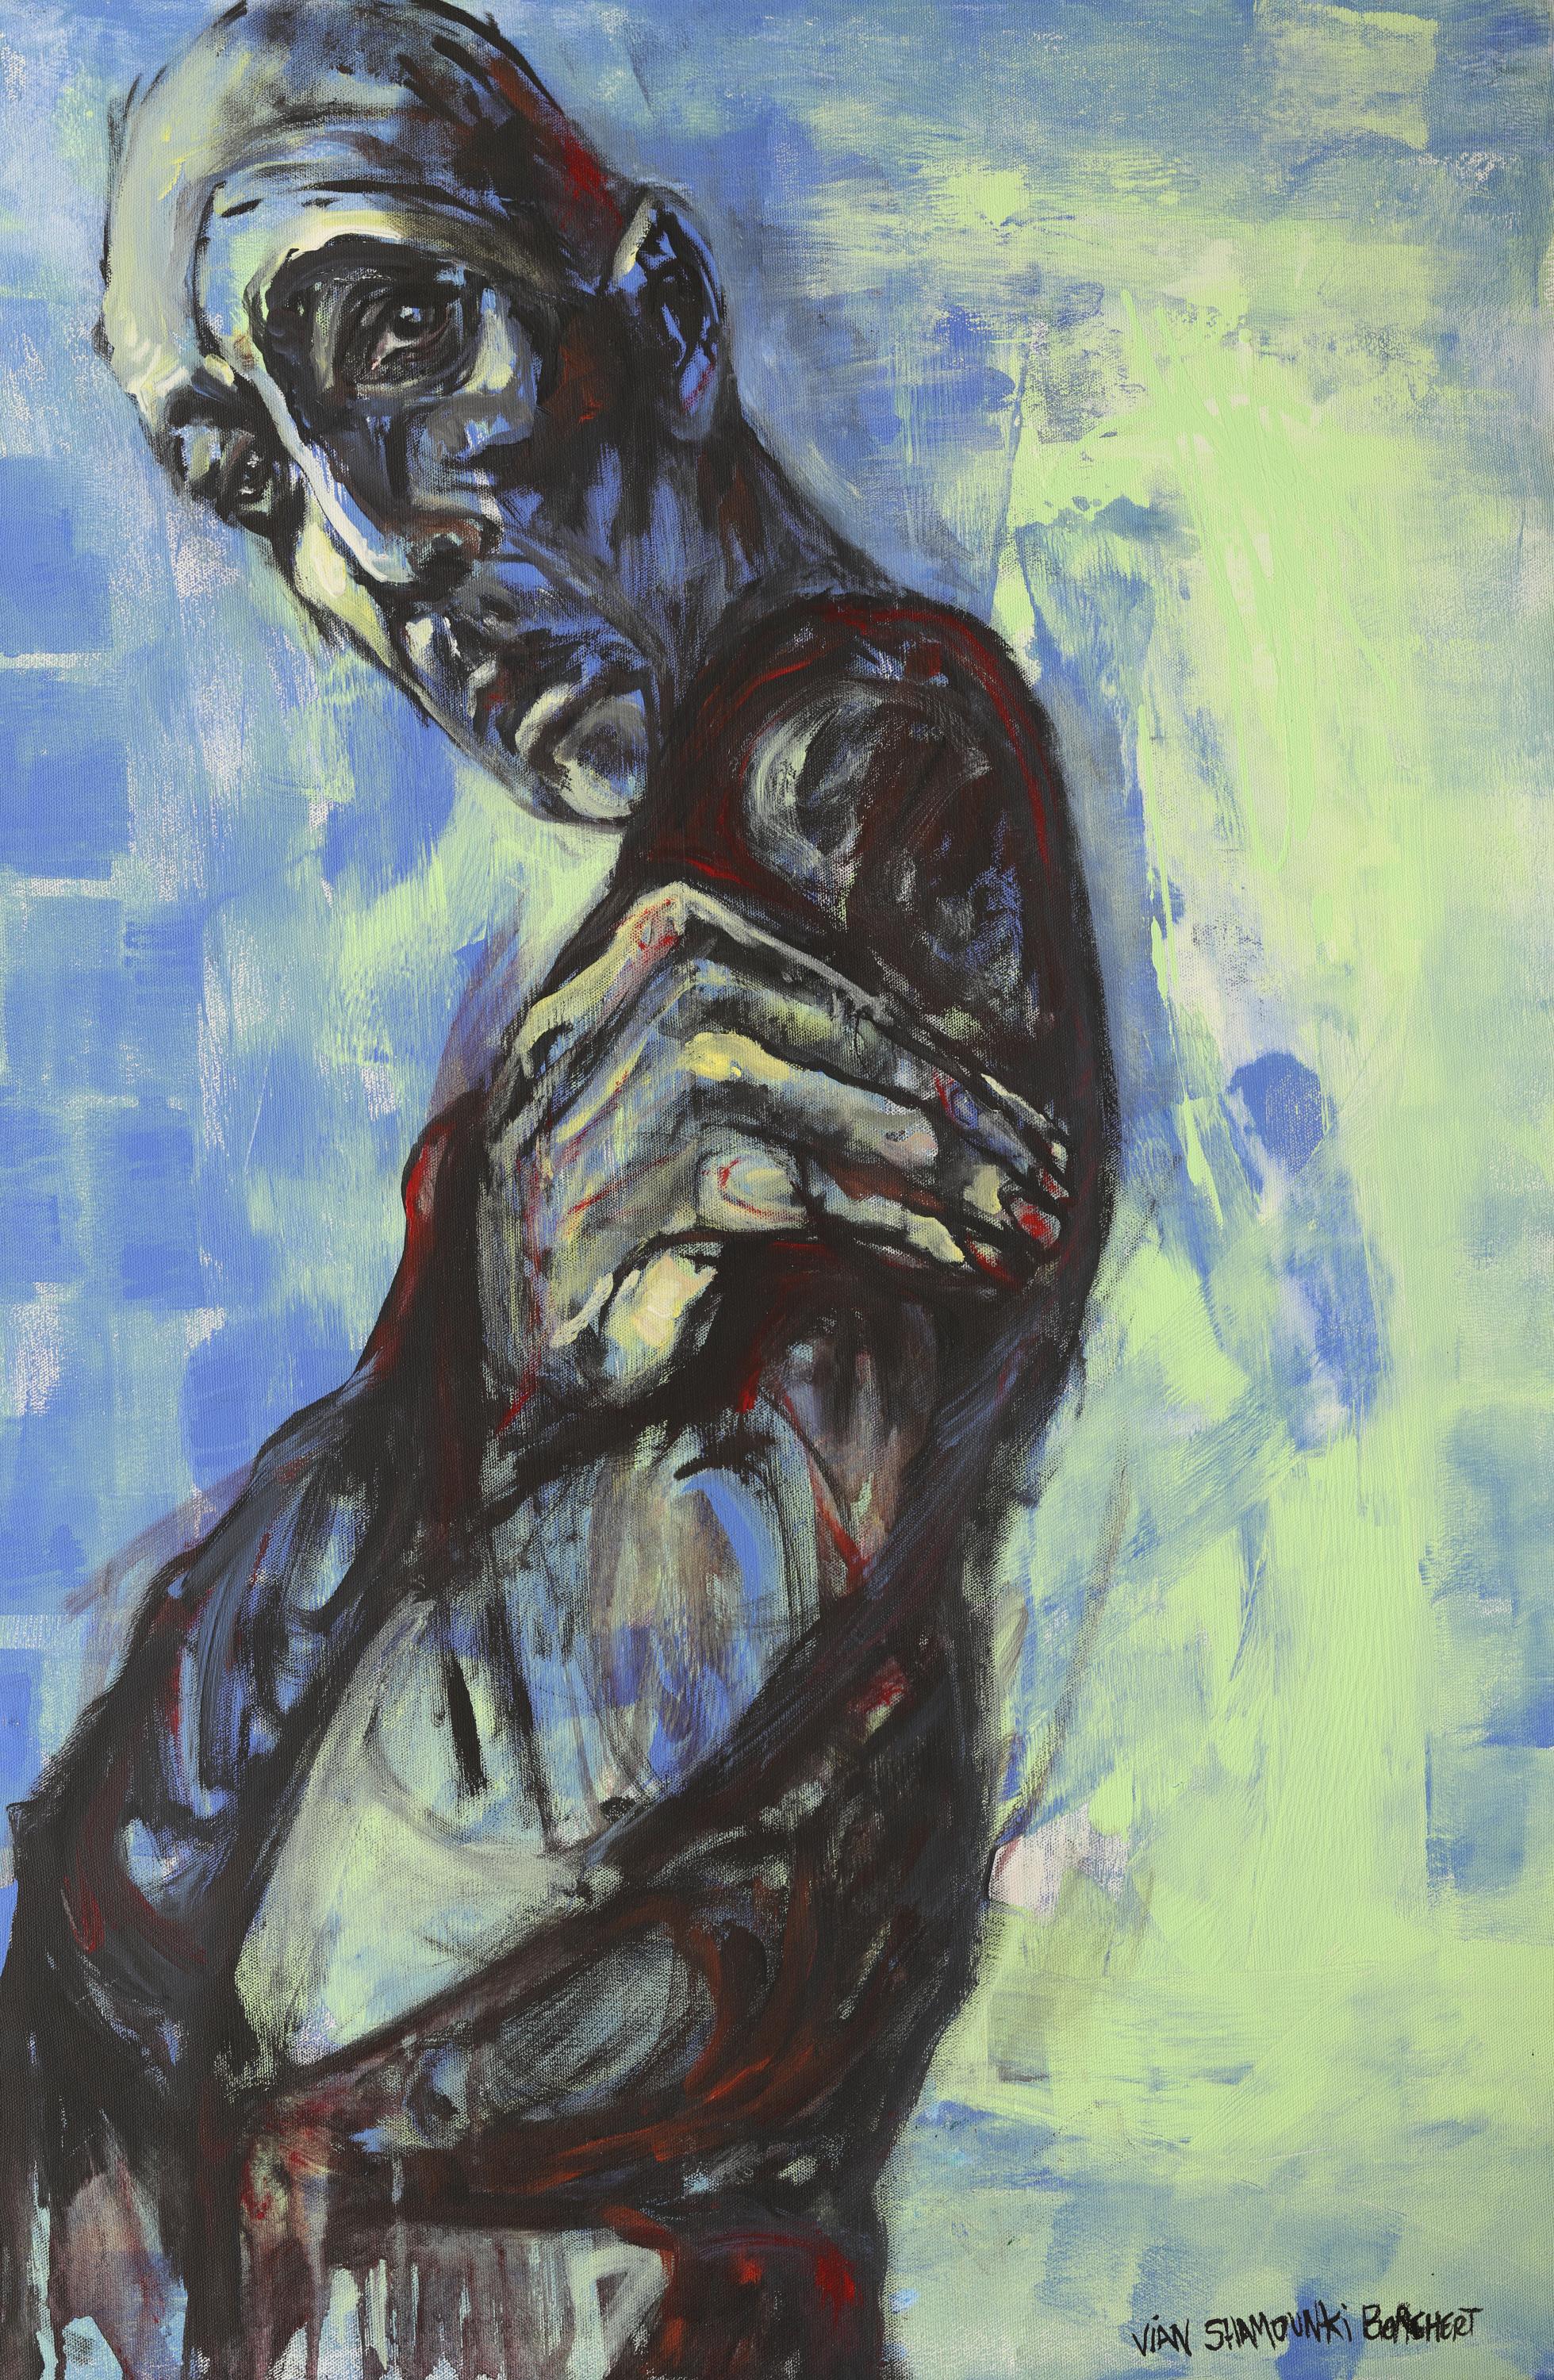 Man - add keywords (Figurative, Figurative abstract, Abstract expressionist, Por